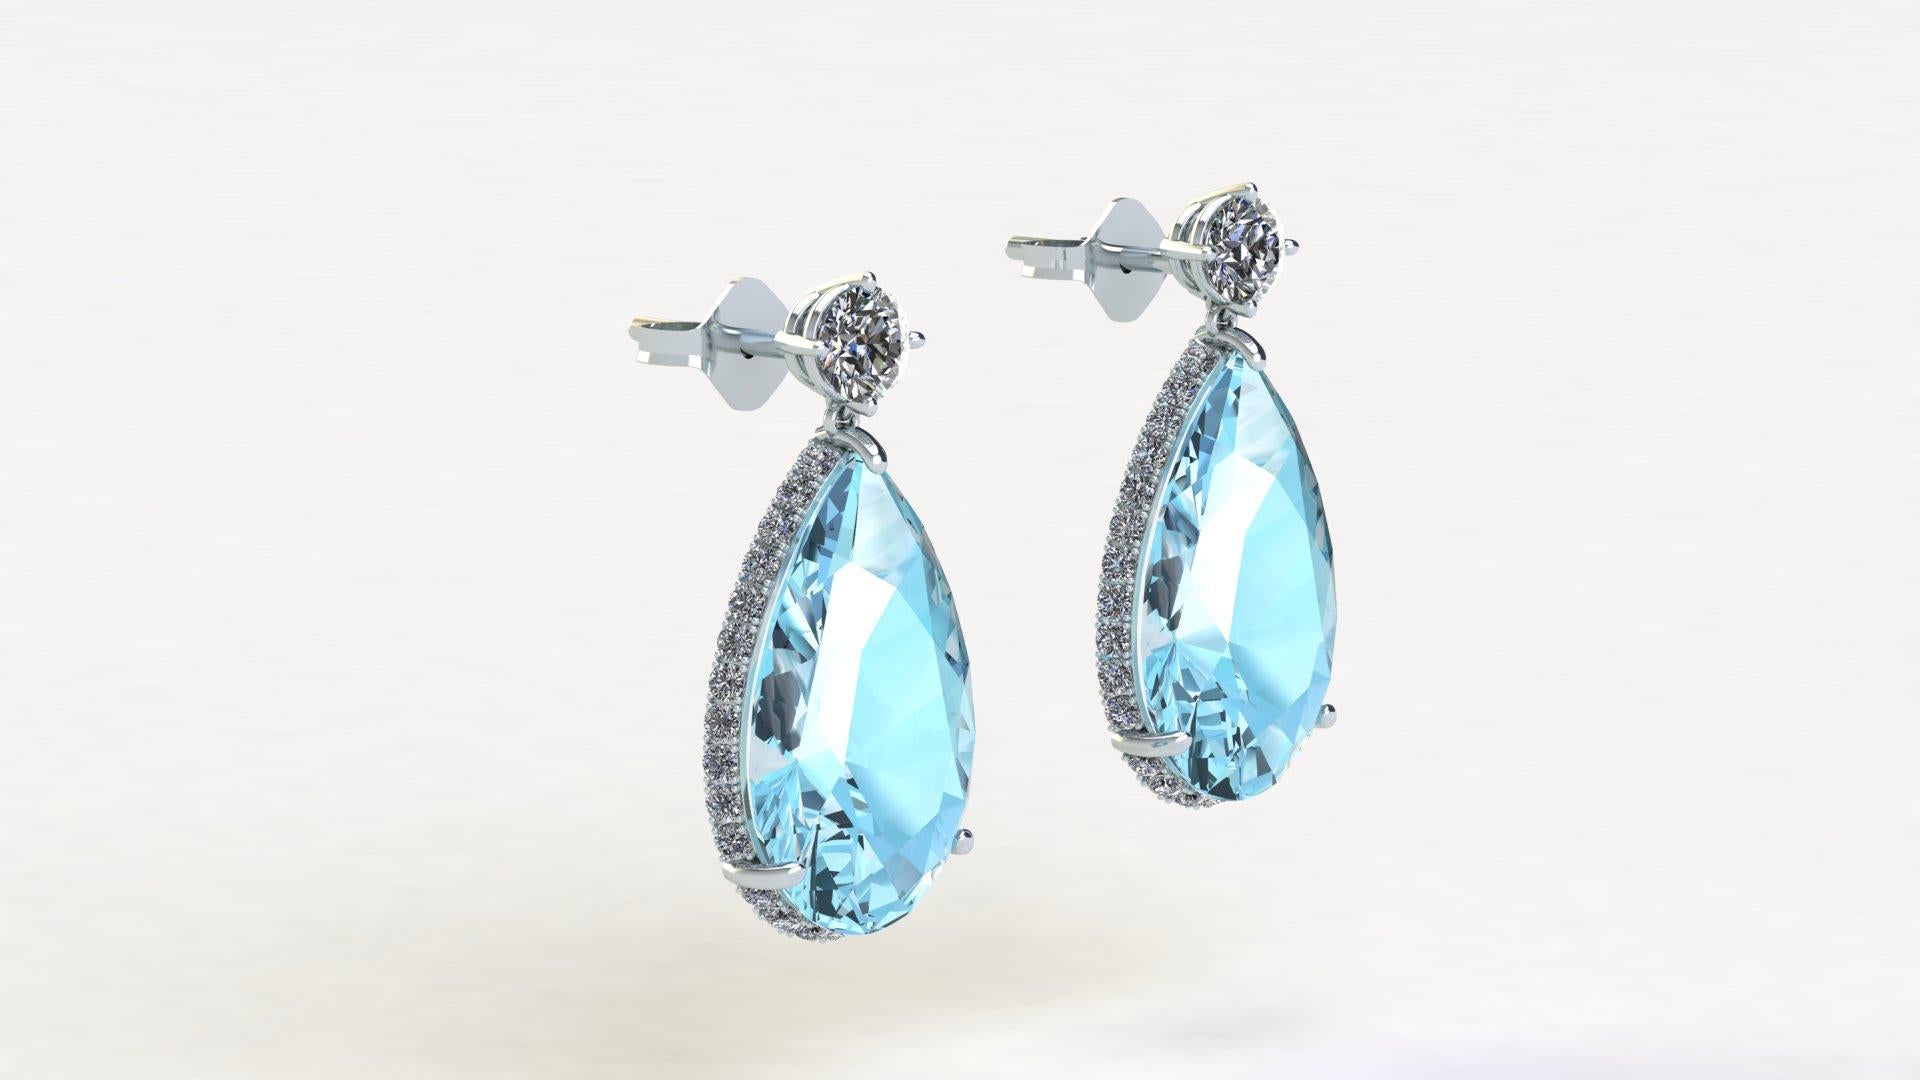 9.96 carats Pear Shape Aquamarine and Diamonds for an approximate total carat weight of 1.00ct of G color, VS clarity, set in Platinum 950 drop dangling earrings
The diamond's halo is designed to be seen from the front and side view of the earrings,